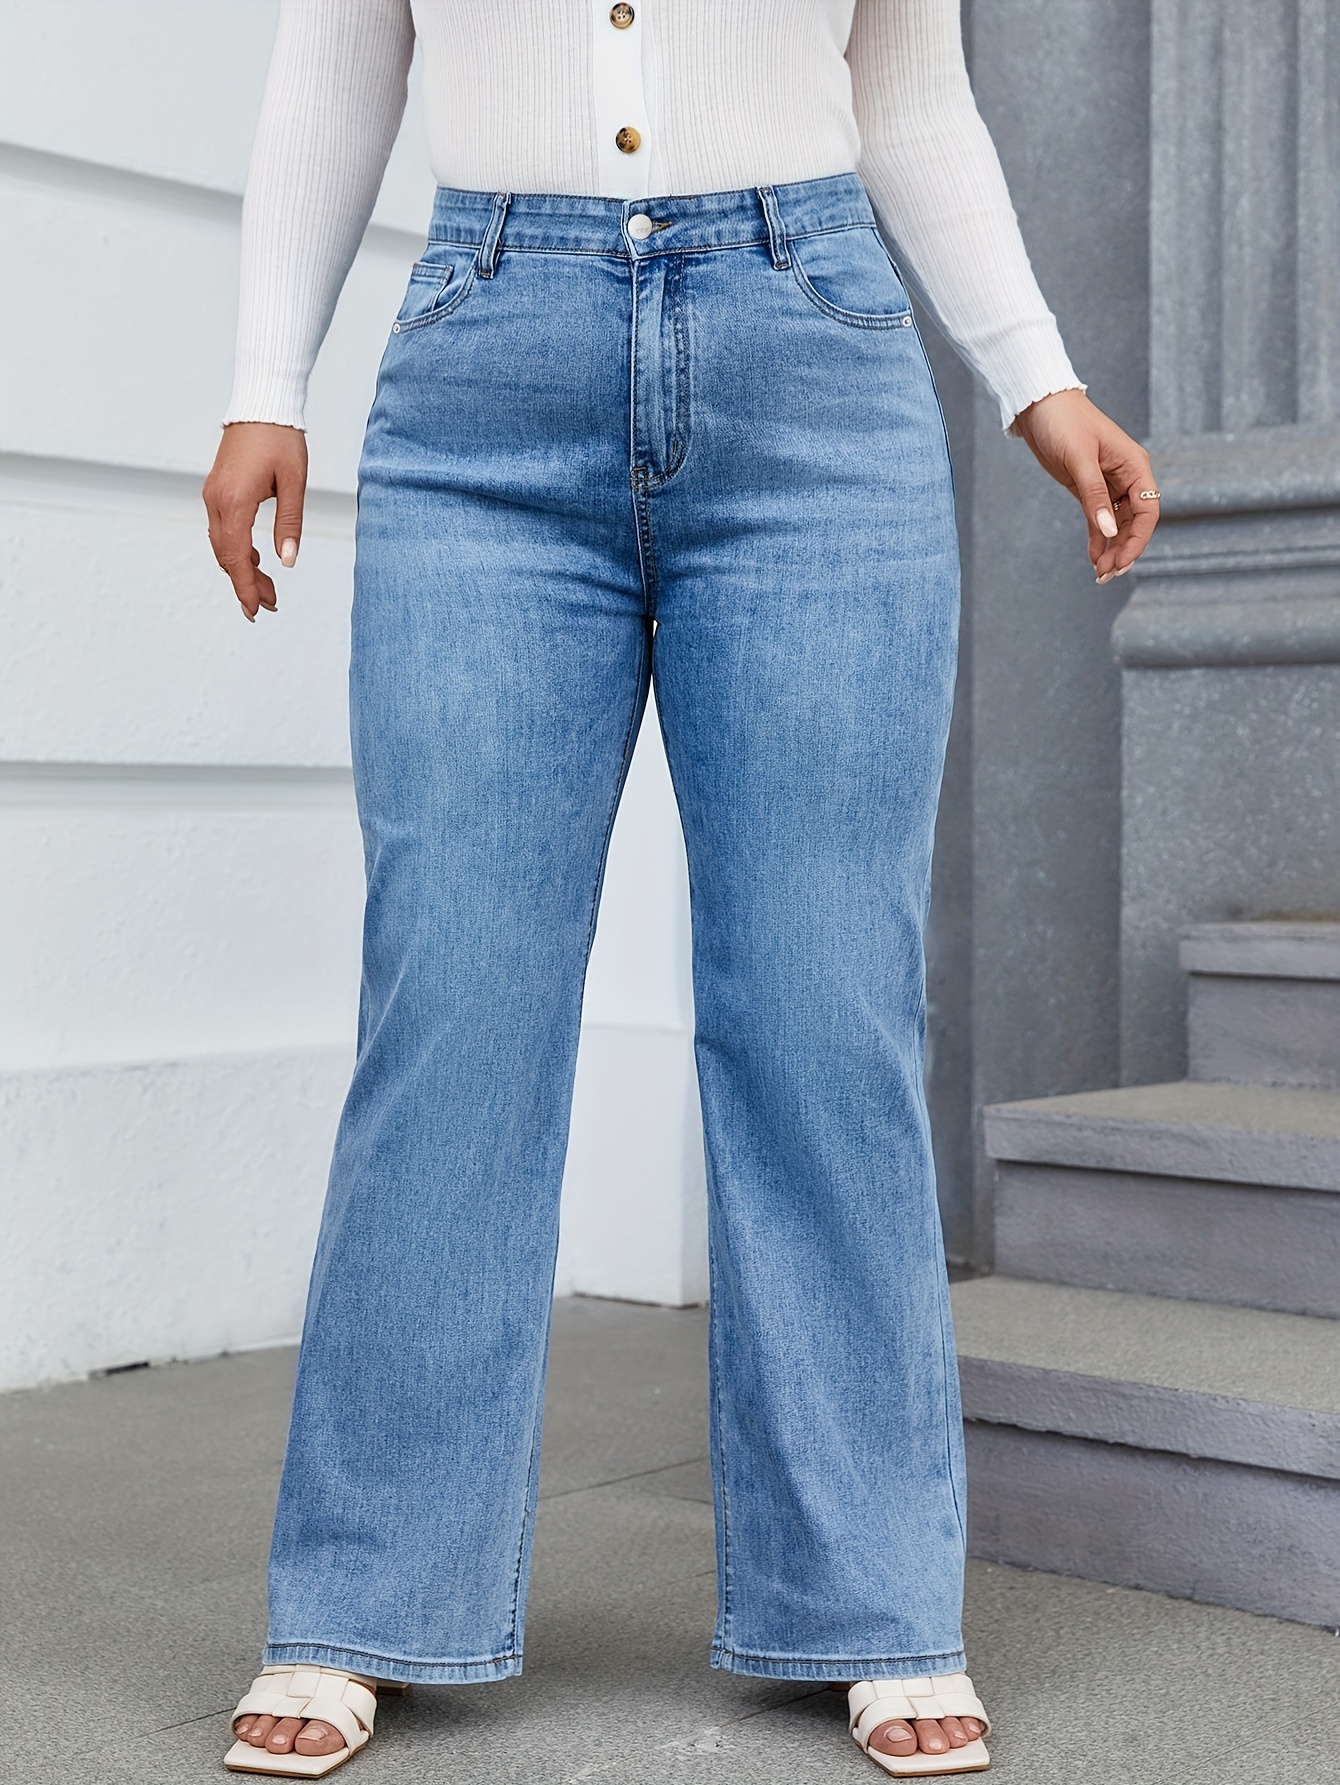 Plus Size Casual Jeans, Women's Plus Ripped Button Fly Medium Stretch  Skinny Destroyed Denim Pants